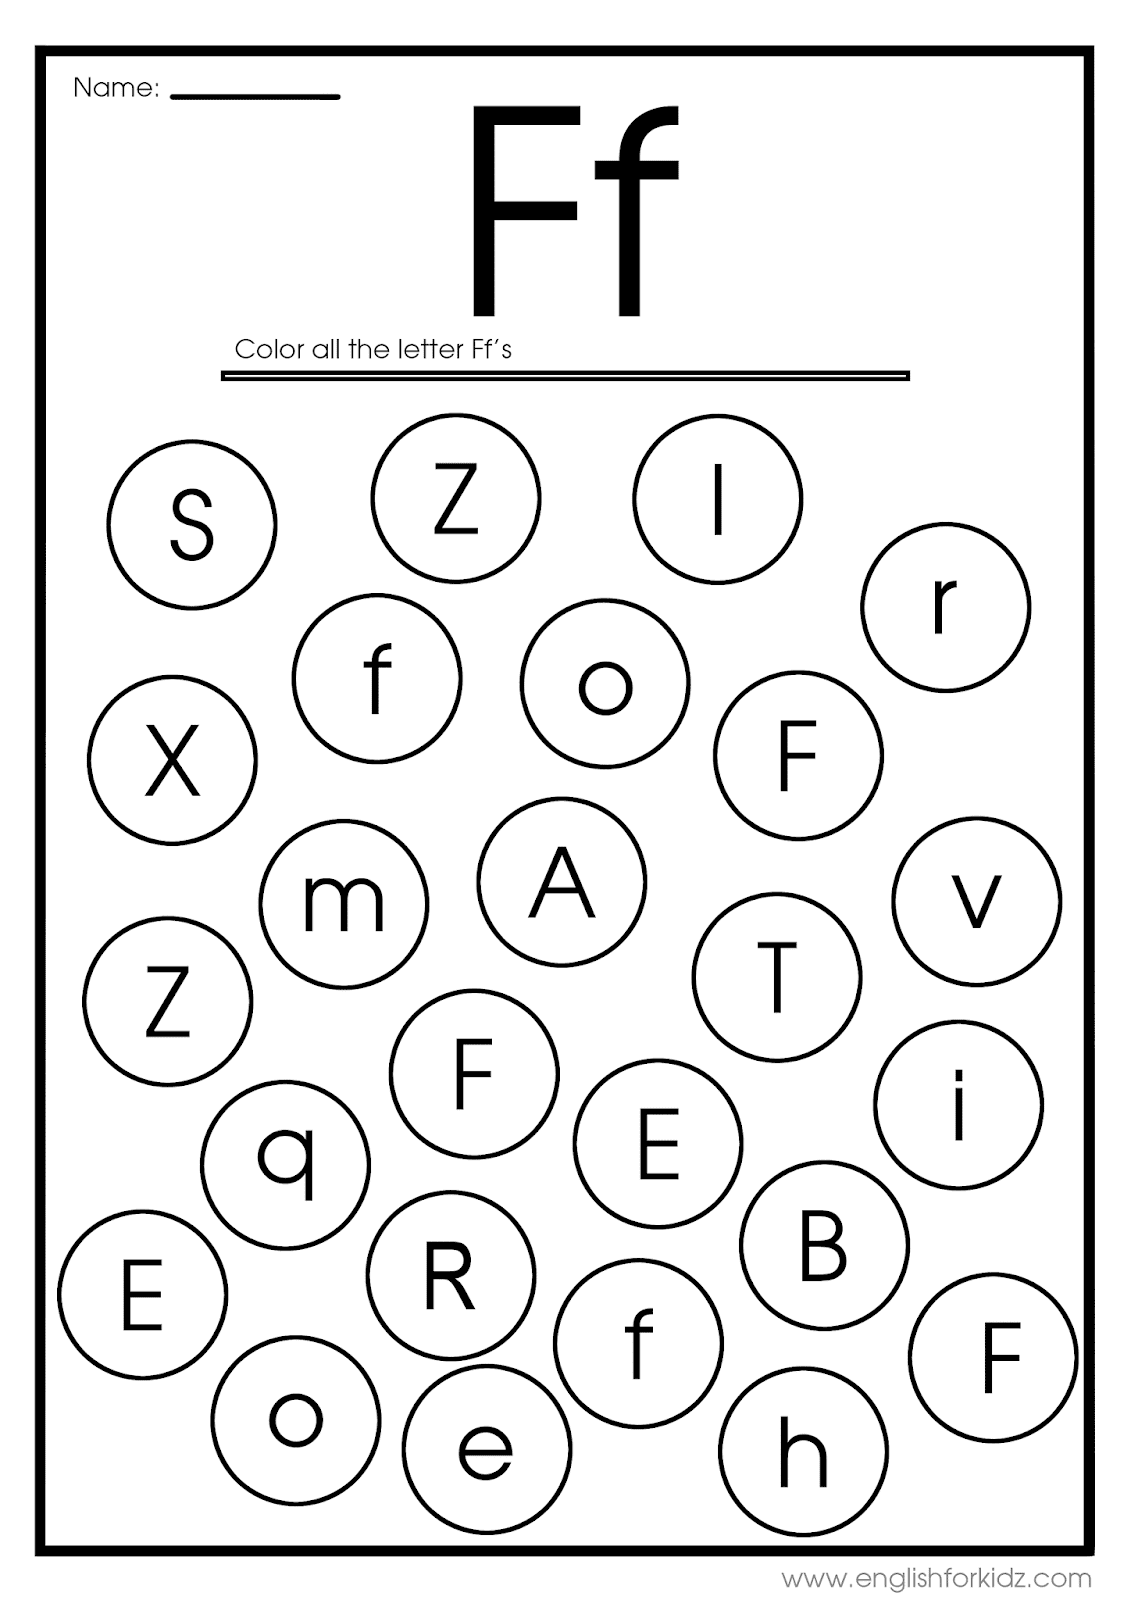 English for kids step by step letter f worksheets flash cards coloring pages